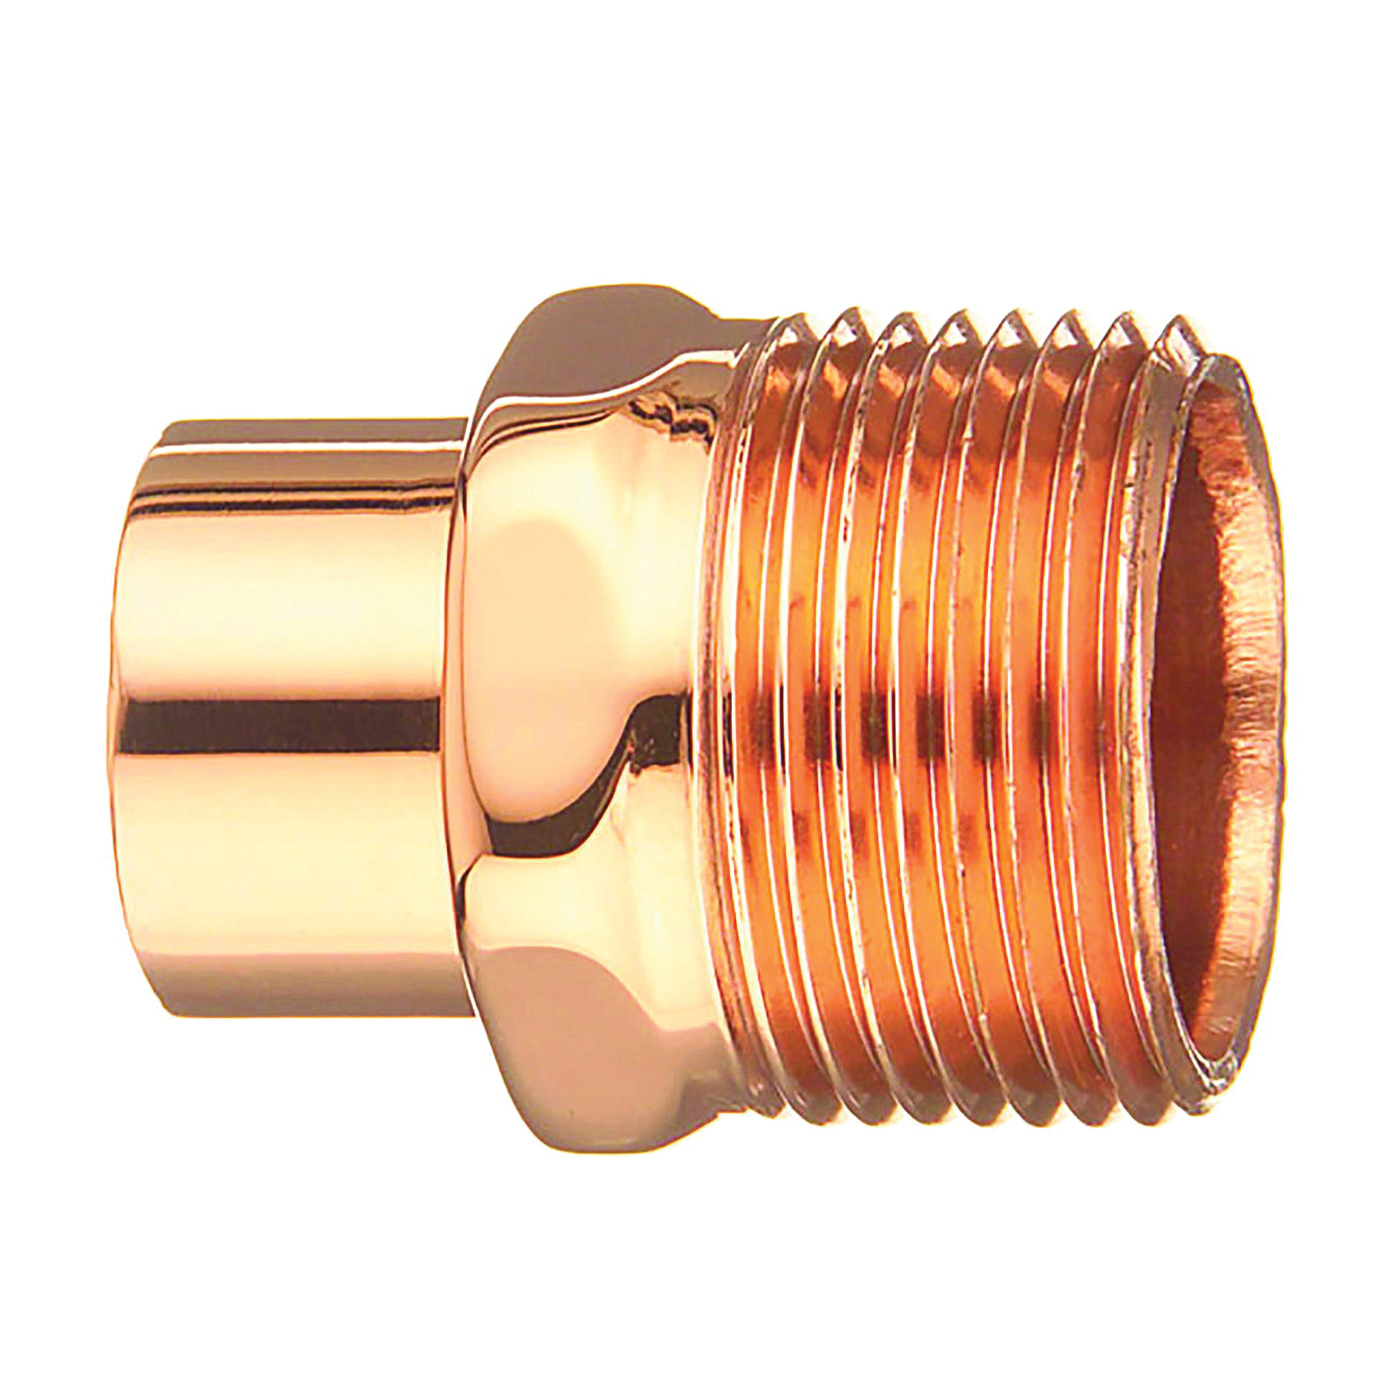 104-2 Series 30436 Street Pipe Adapter, 1/2 in, FTG x MIP, Copper